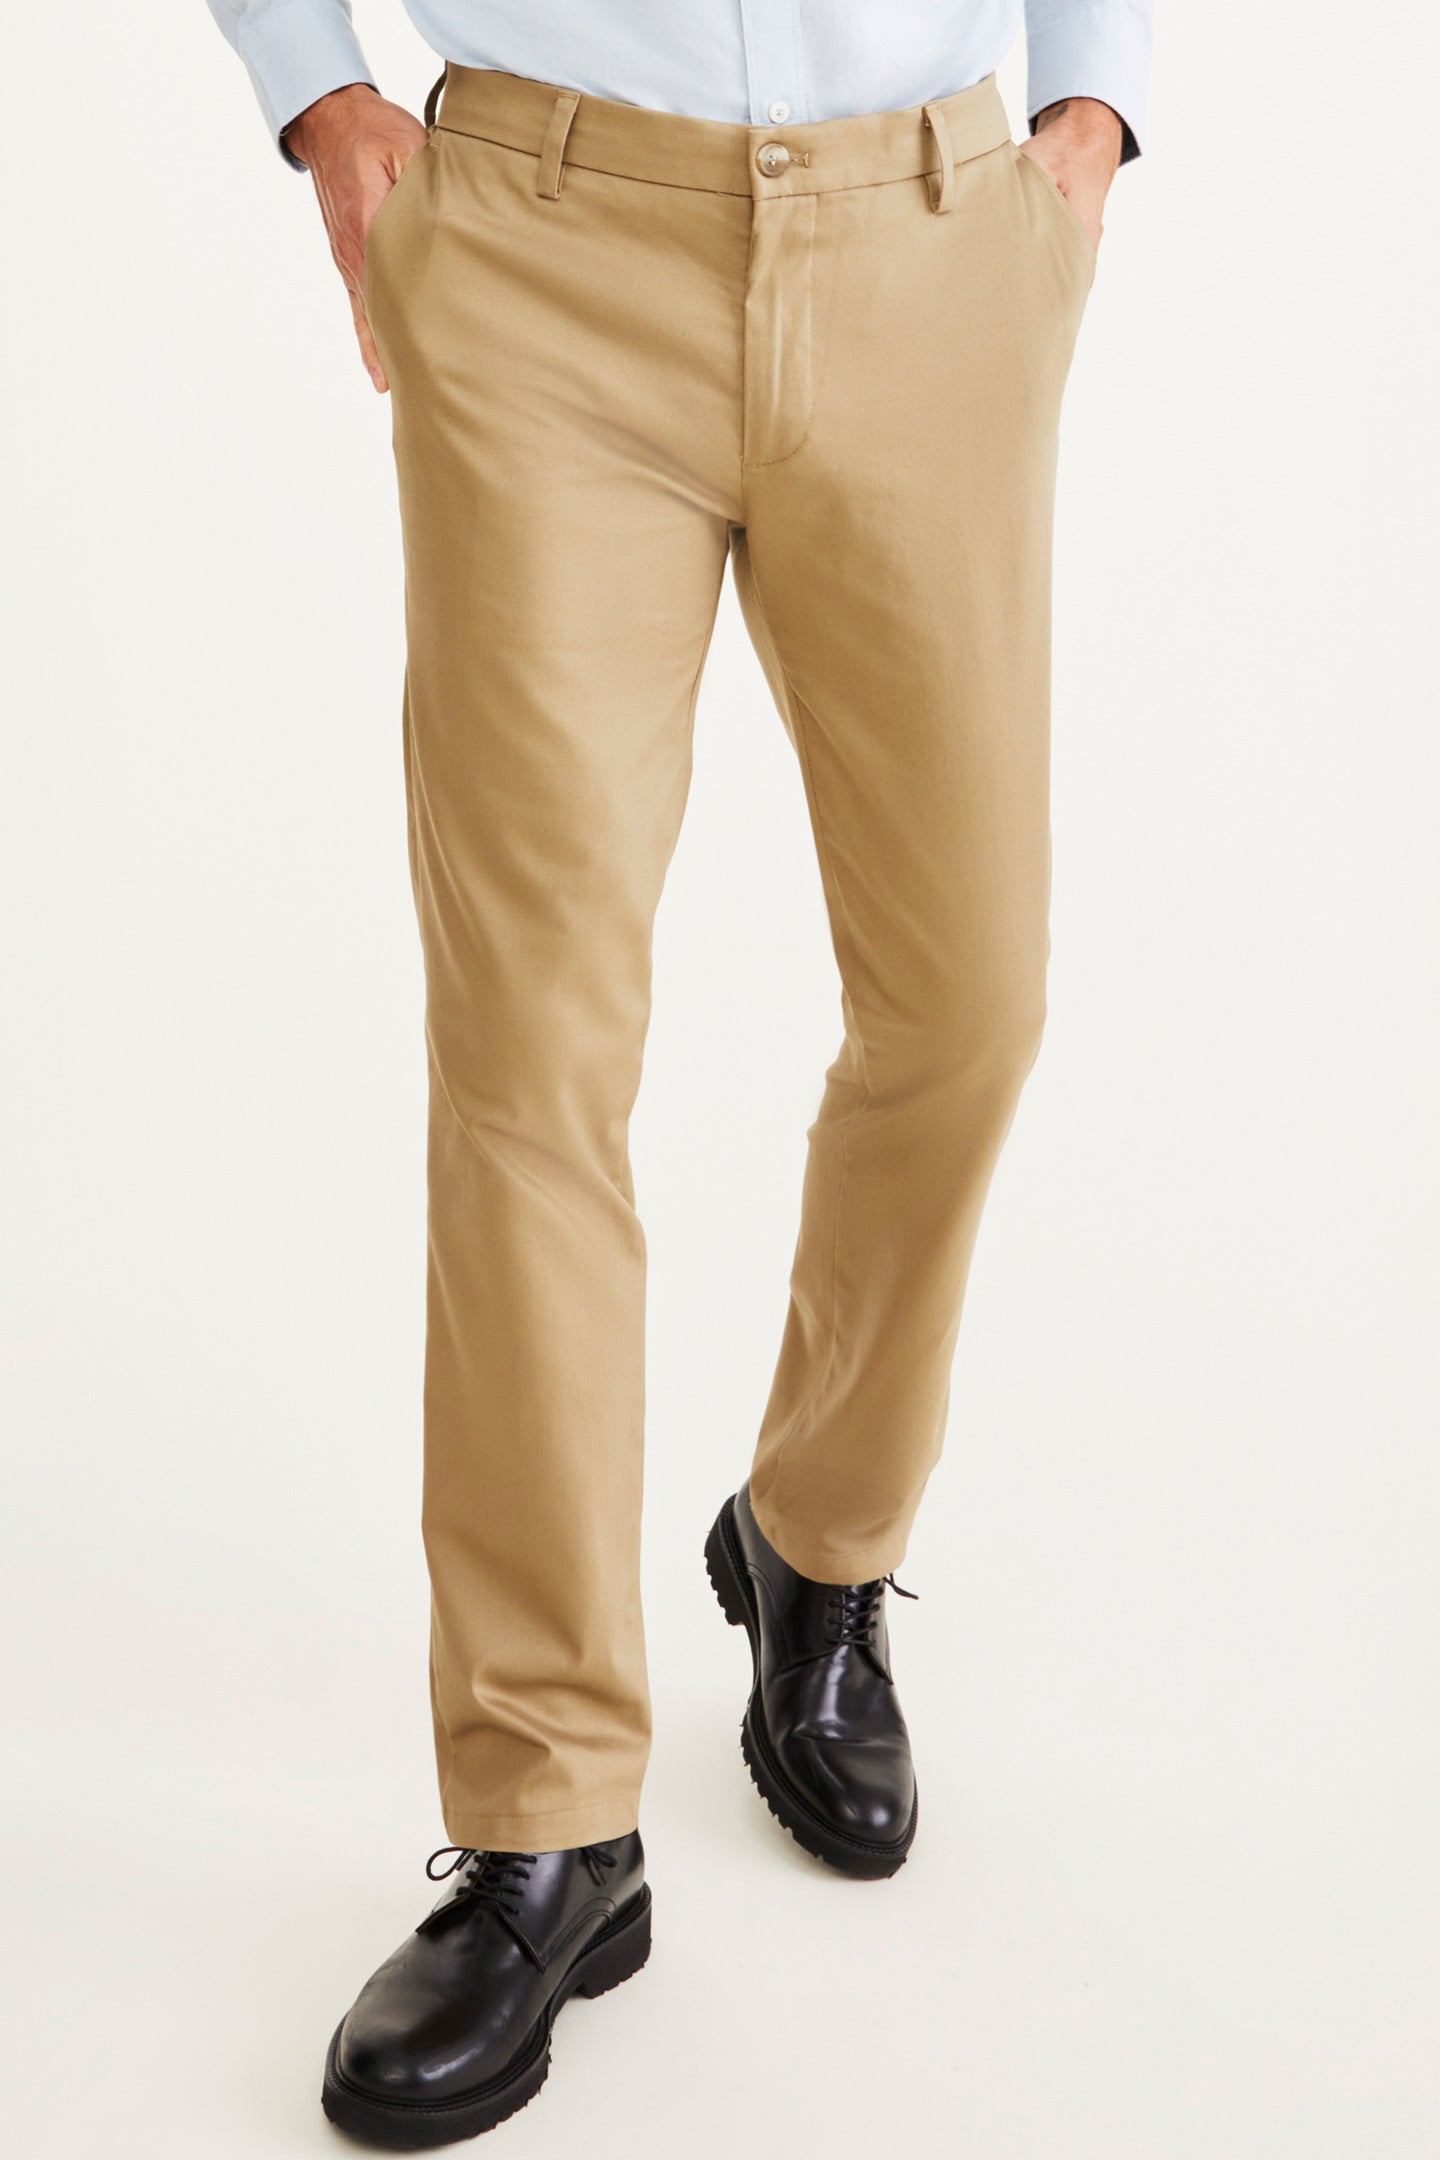 Buy 72 Degree Men's Cotton Slim Fit Chinos Pants Stretchable (28, Olive) at  Amazon.in